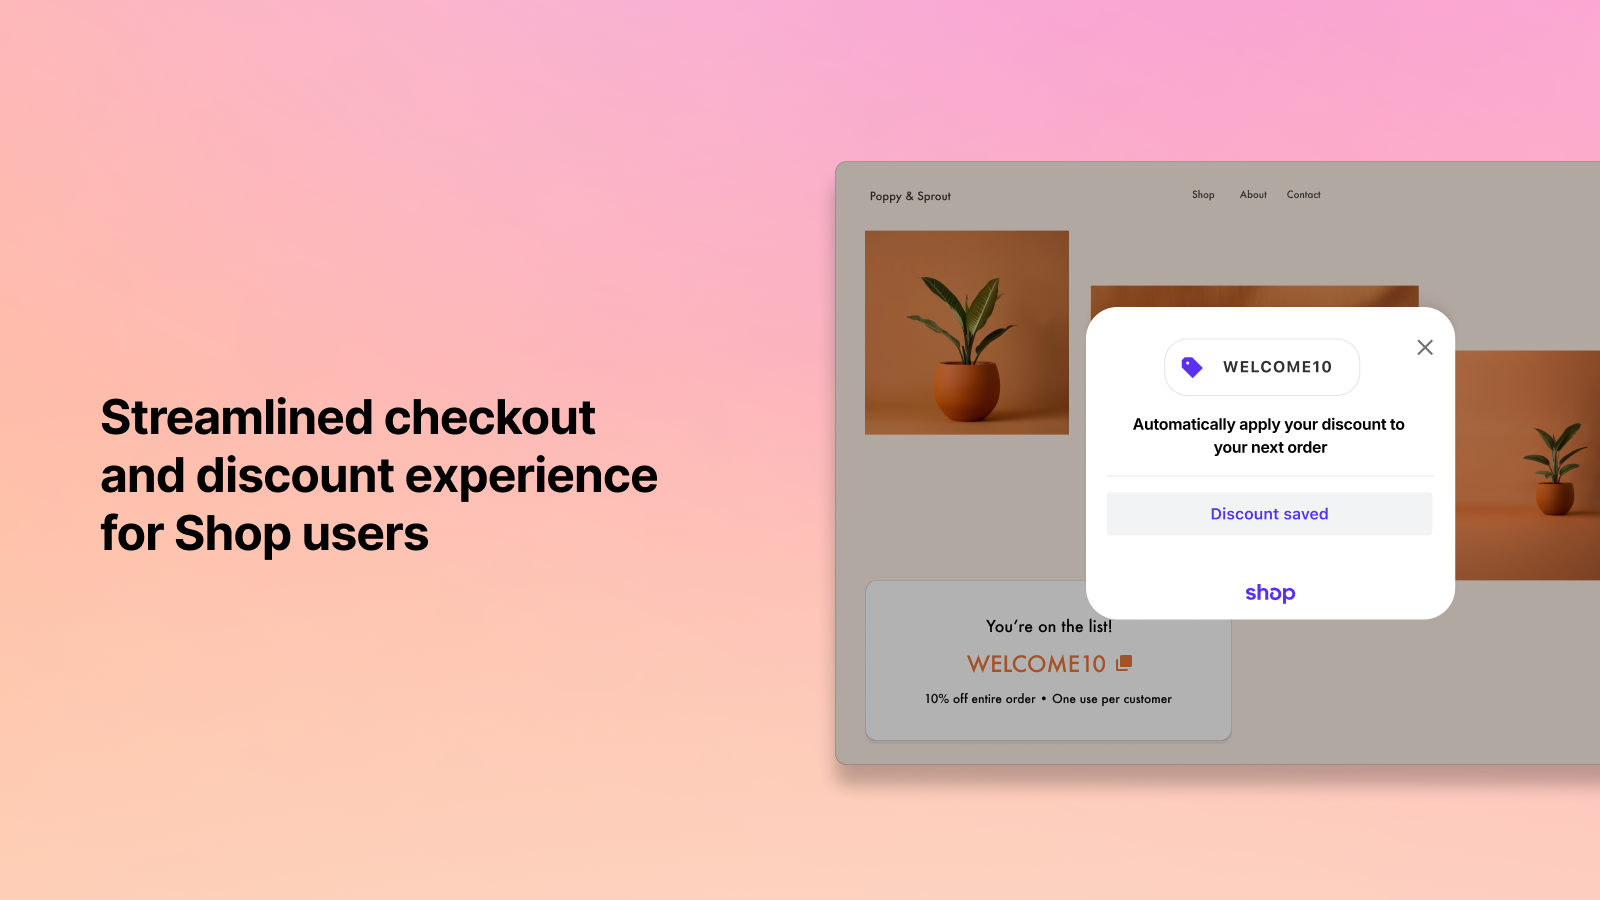 Streamlined checkout and discount experience for Shop users 